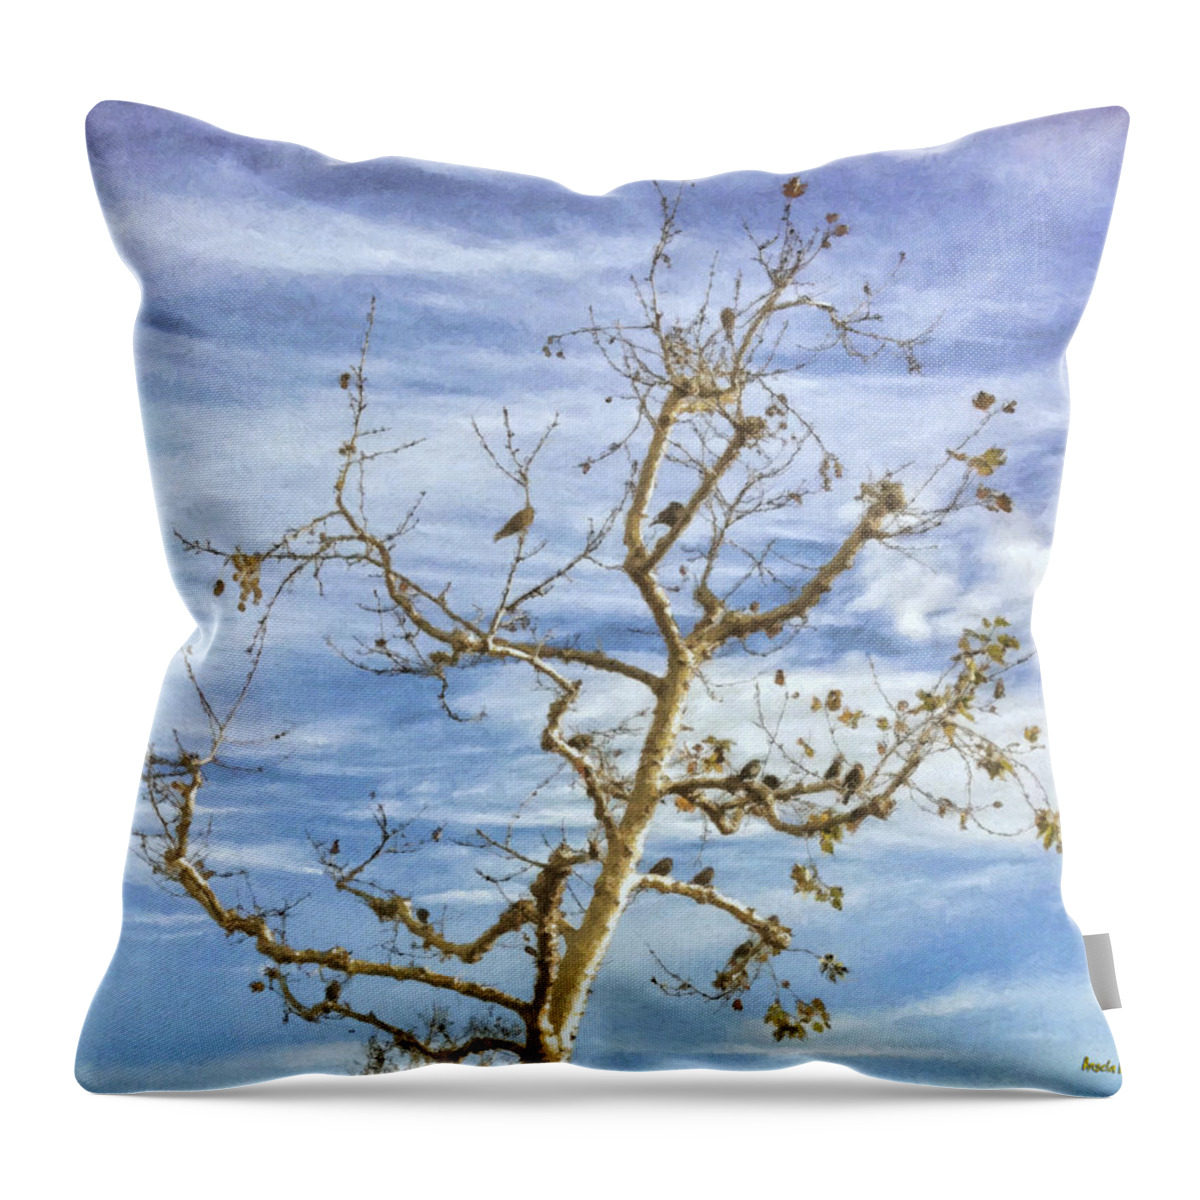 Blackbird Throw Pillow featuring the painting Blackbirds in a tree by Angela Stanton